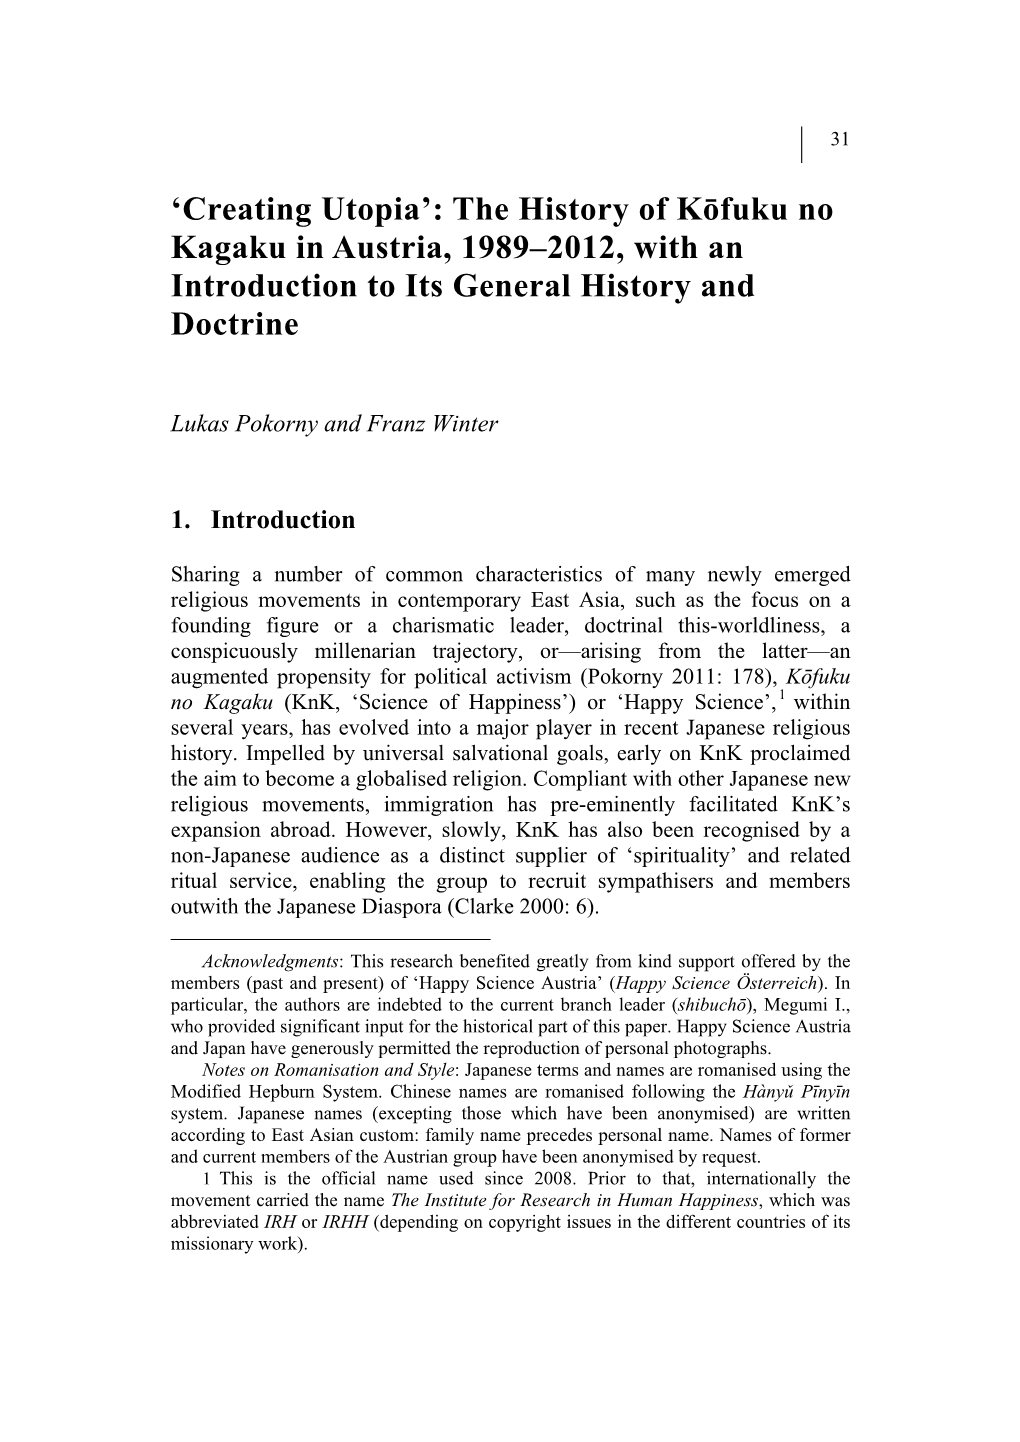 Creating Utopia’: the History of Kōfuku No Kagaku in Austria, 1989–2012, with an Introduction to Its General History and Doctrine